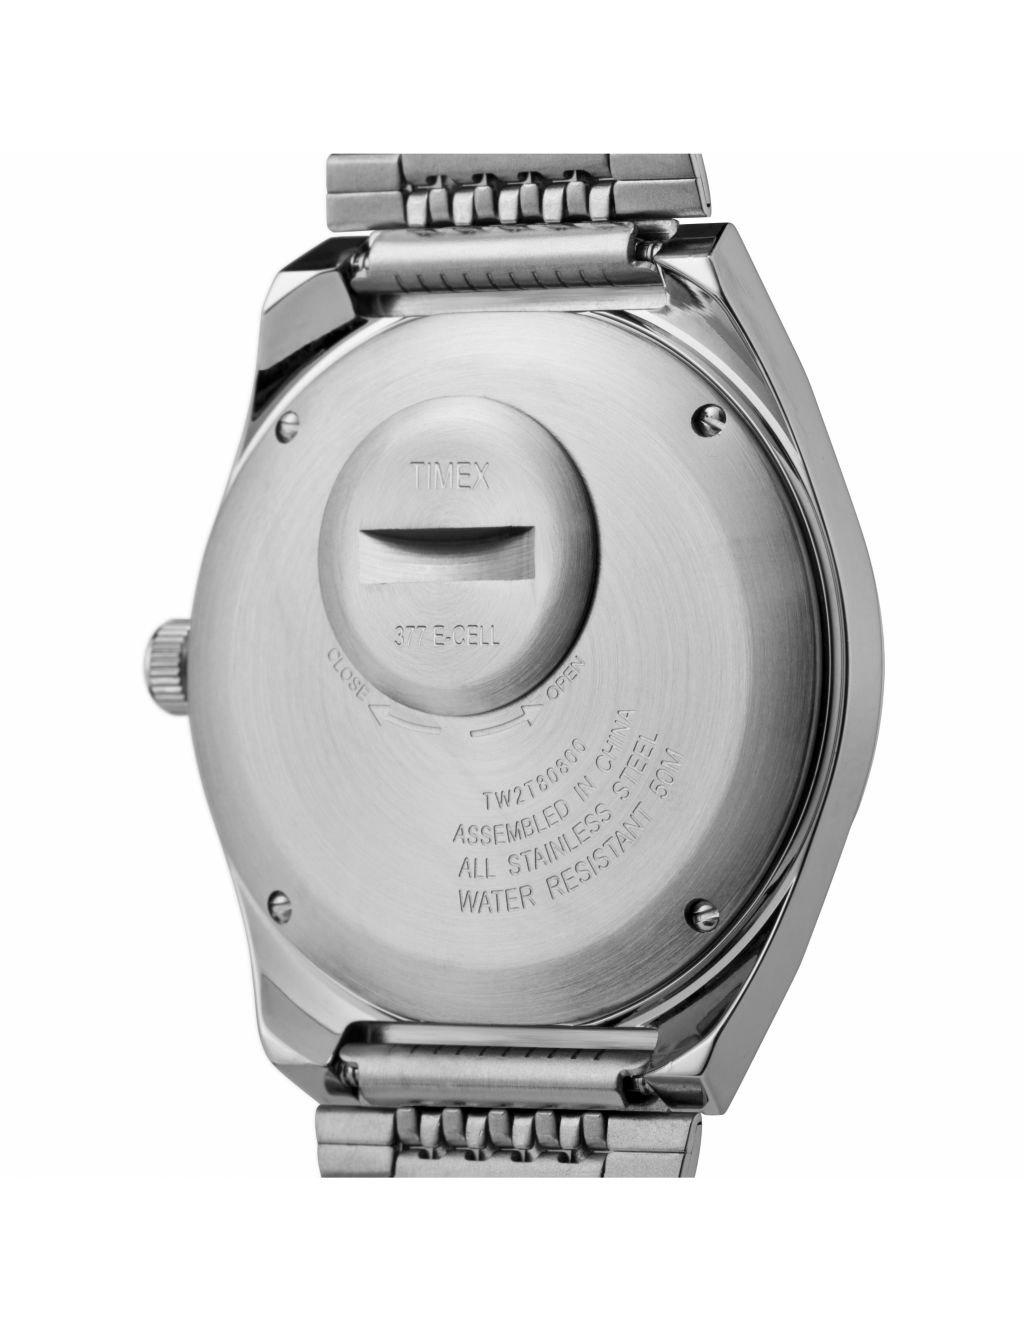 Timex Q Falcon Eye Stainless Steel Watch image 3